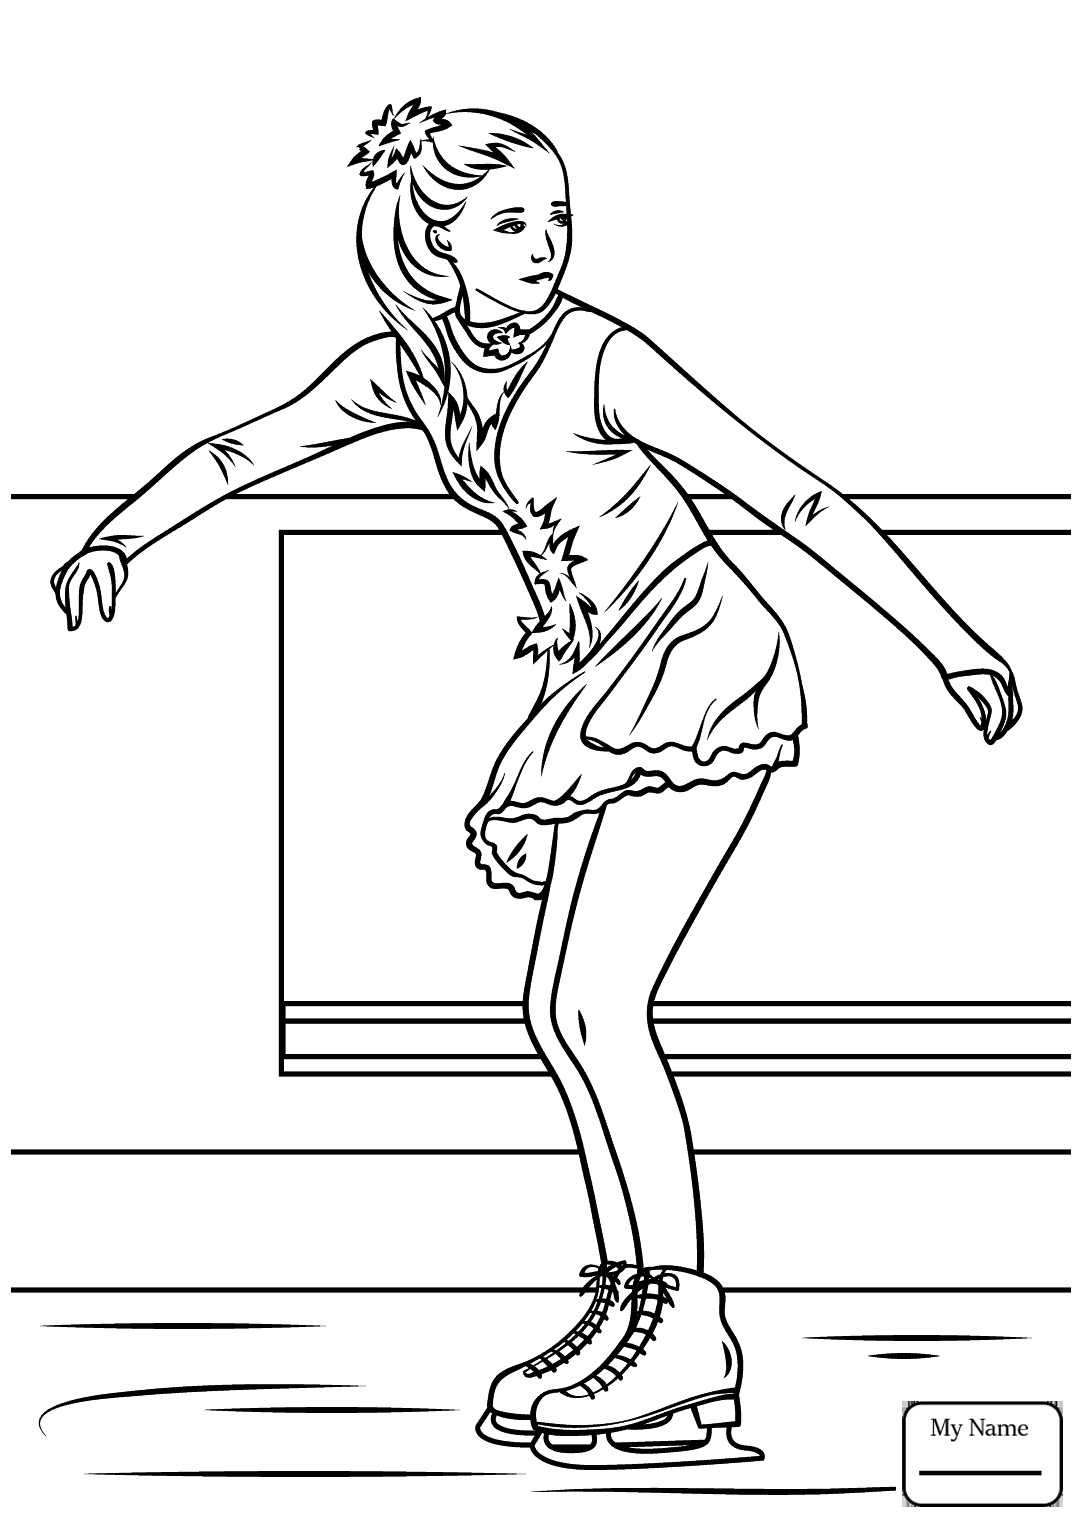 Boys Skating In Winter Coloring Pages
 Ice Skater Drawing at GetDrawings